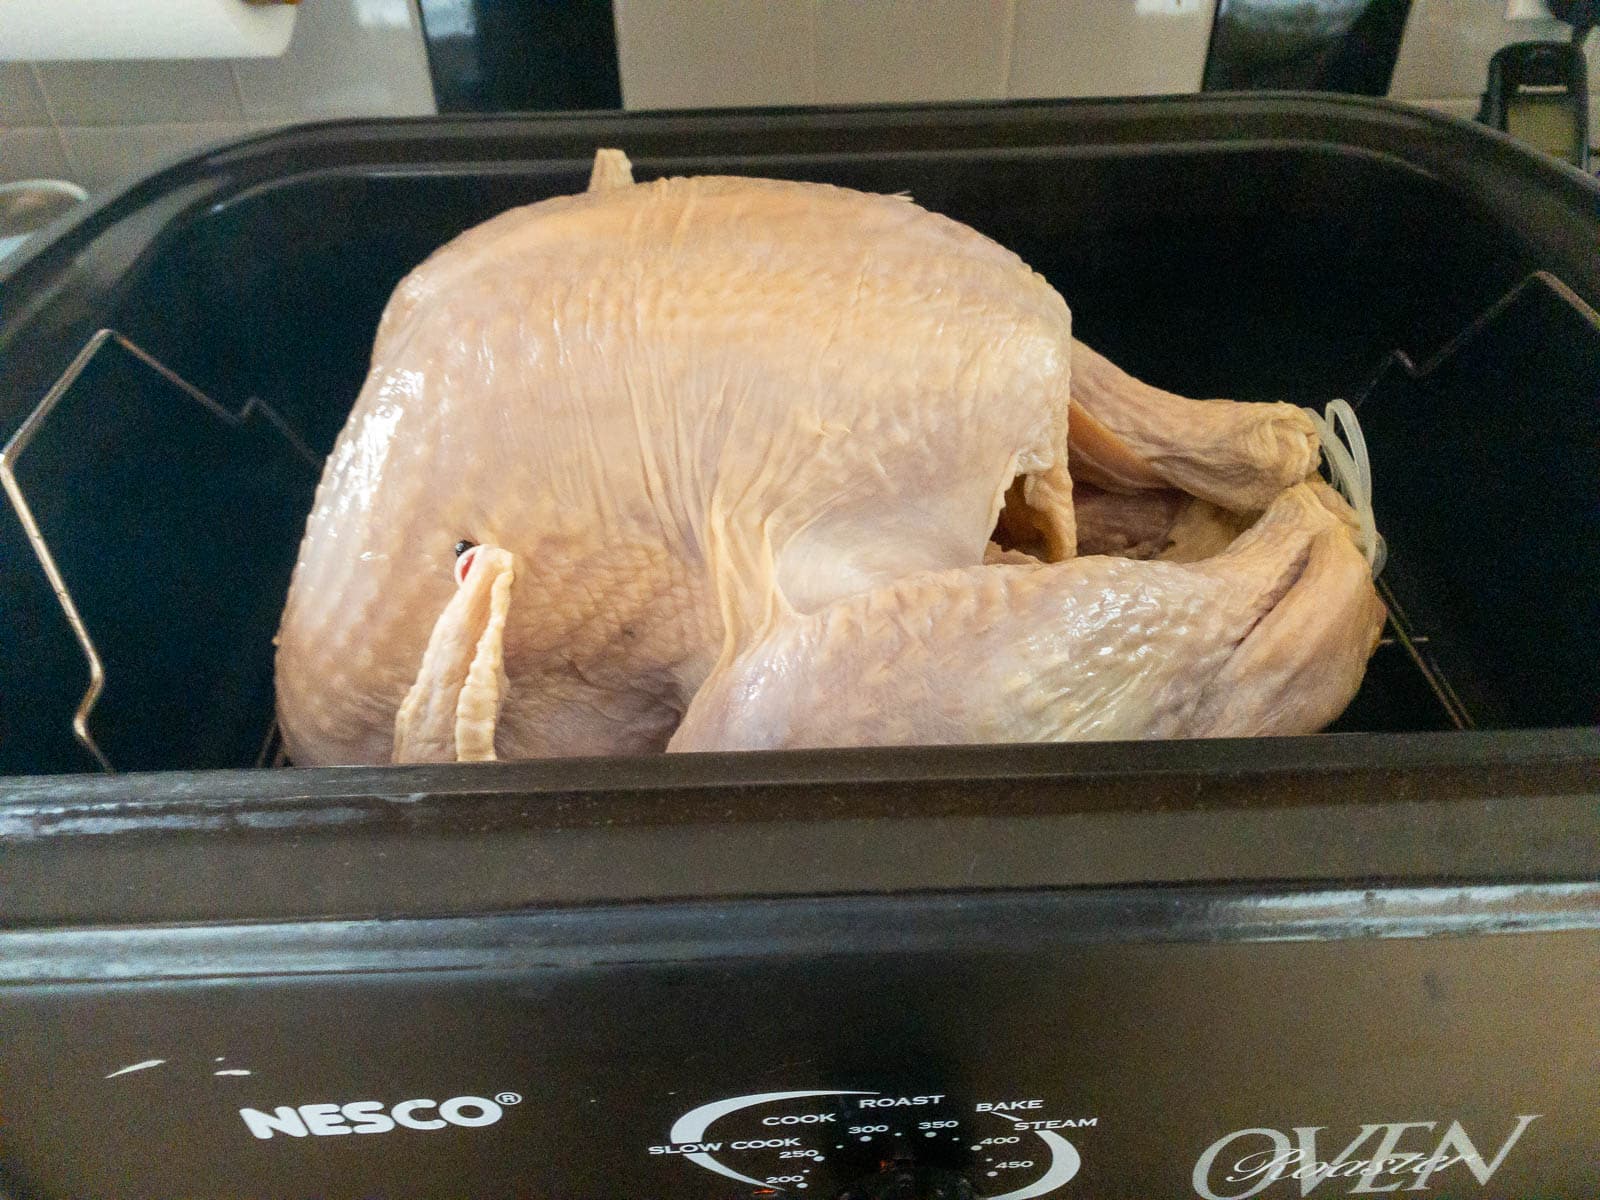 Turkey In A Roaster Oven - Plowing Through Life